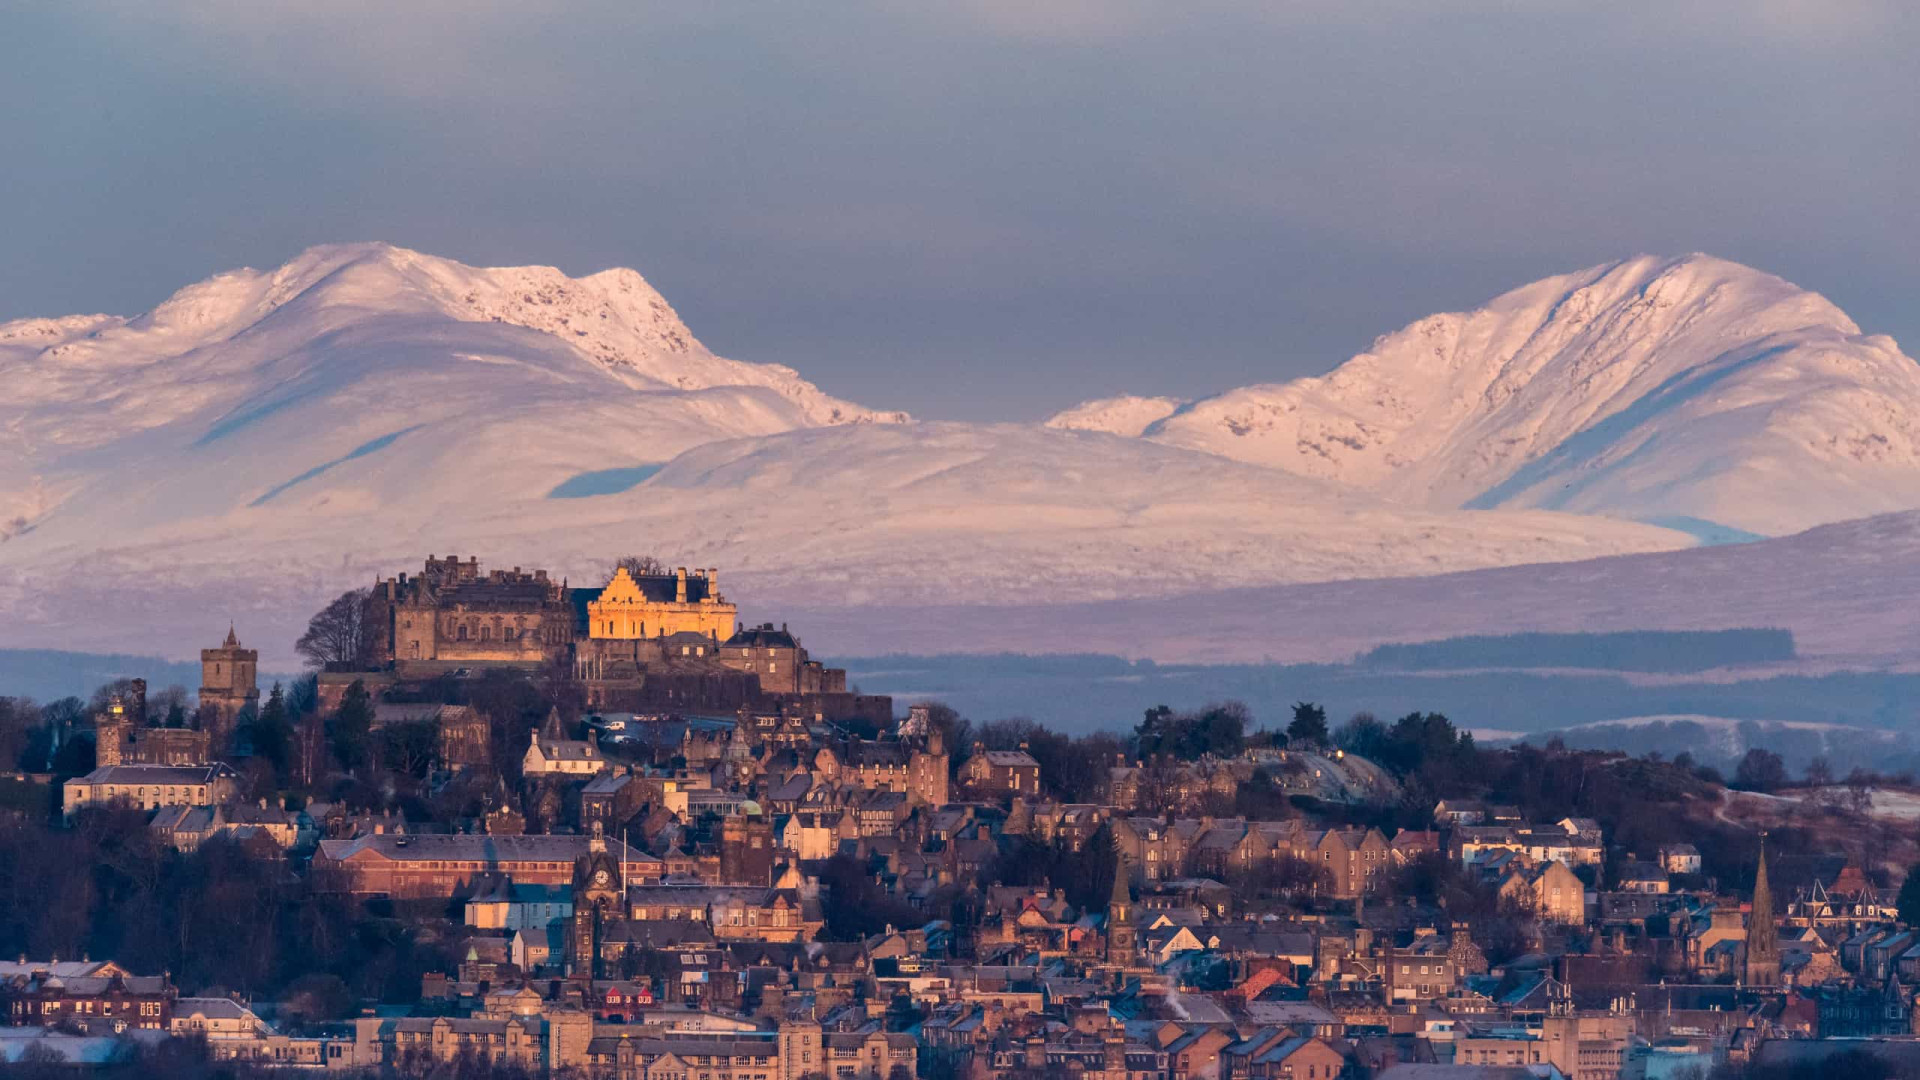 <p>The beautiful hilltop castle in Stirling, central Scotland, welcomes visitors for afternoon tea. But linger after dark and you may come across an uninvited guest.</p><p><a href="https://www.msn.com/en-ca/community/channel/vid-7xx8mnucu55yw63we9va2gwr7uihbxwc68fxqp25x6tg4ftibpra?cvid=94631541bc0f4f89bfd59158d696ad7e">Follow us and access great exclusive content every day</a></p>